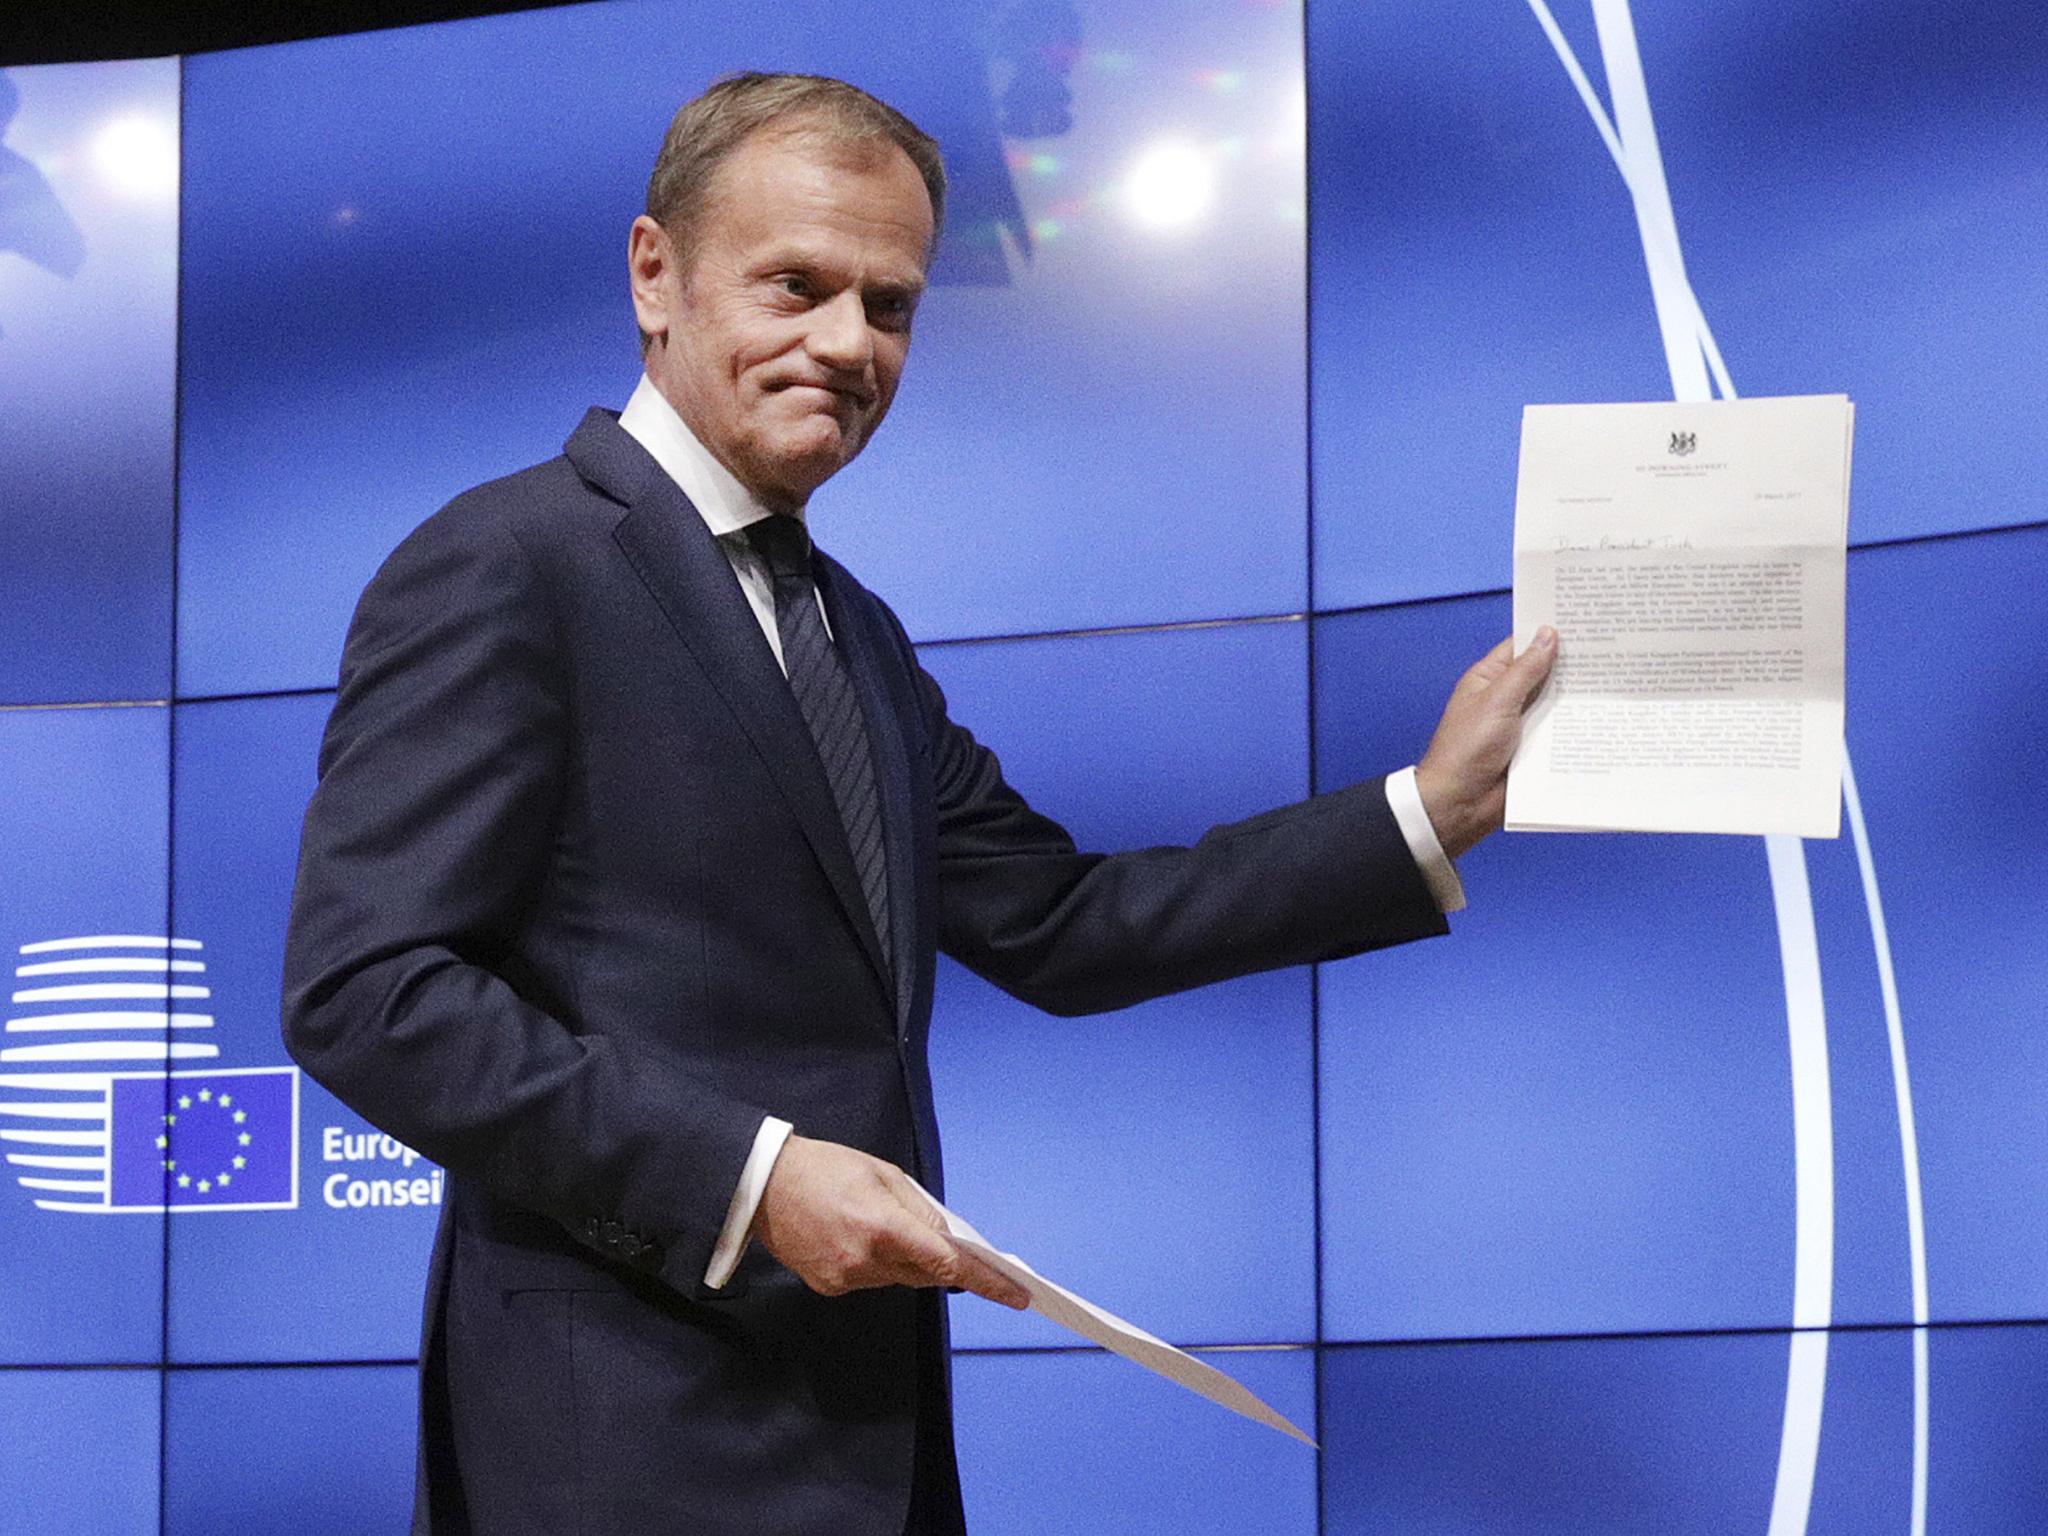 Donald Tusk showing the letter he received signed by Prime Minister Theresa May, which formally notified of the UK's intention to exit the EU